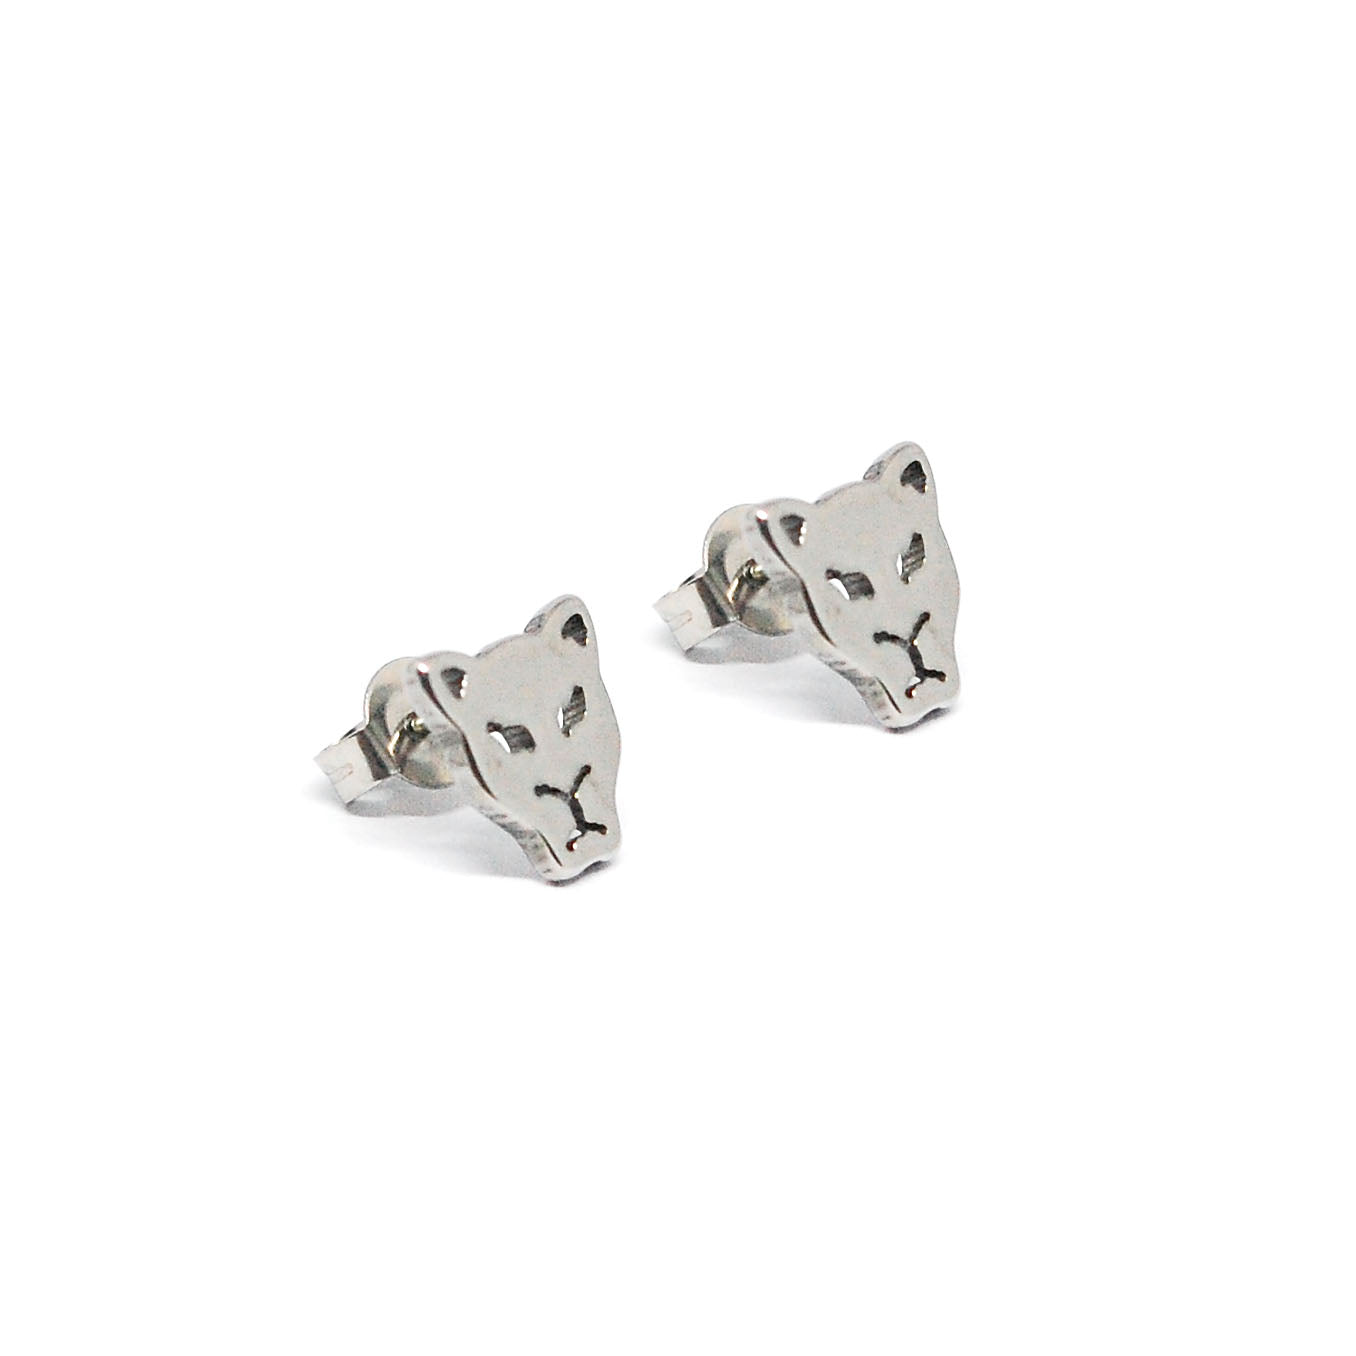 ESE 4943: White Panther Studs Earrings